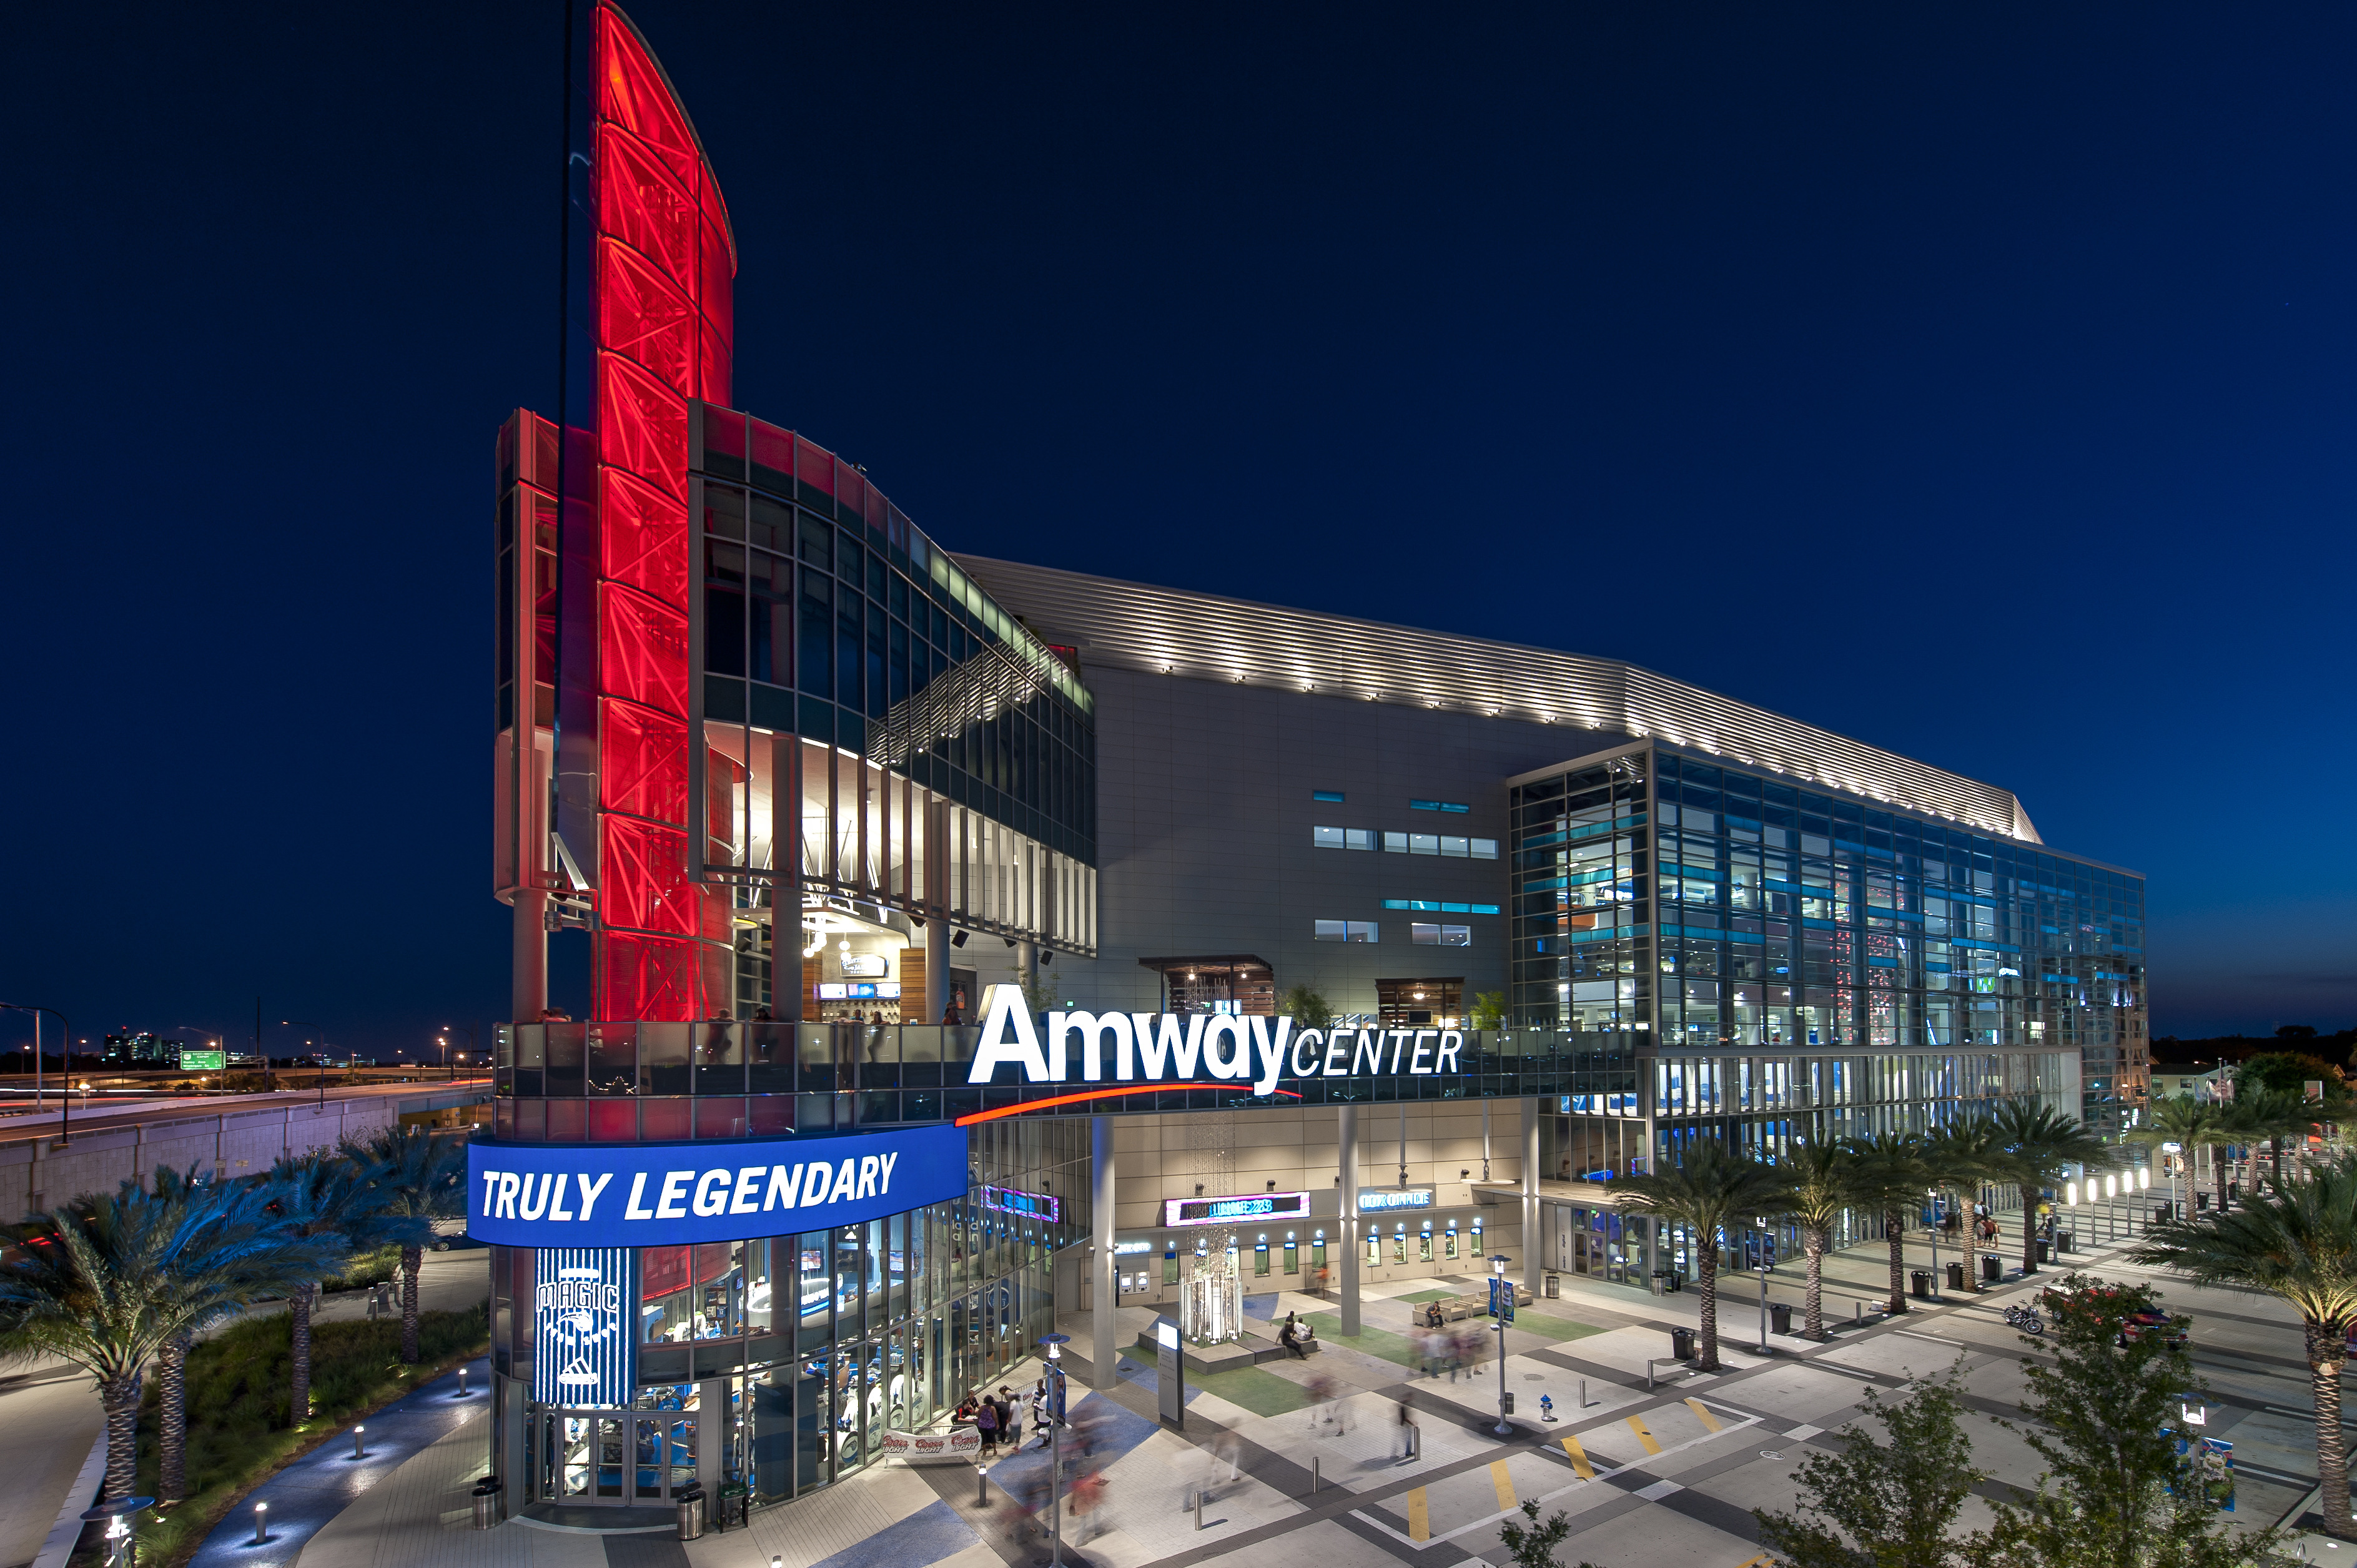 Amway Center Continues to Thrive – THE HOTSPOTORLANDO